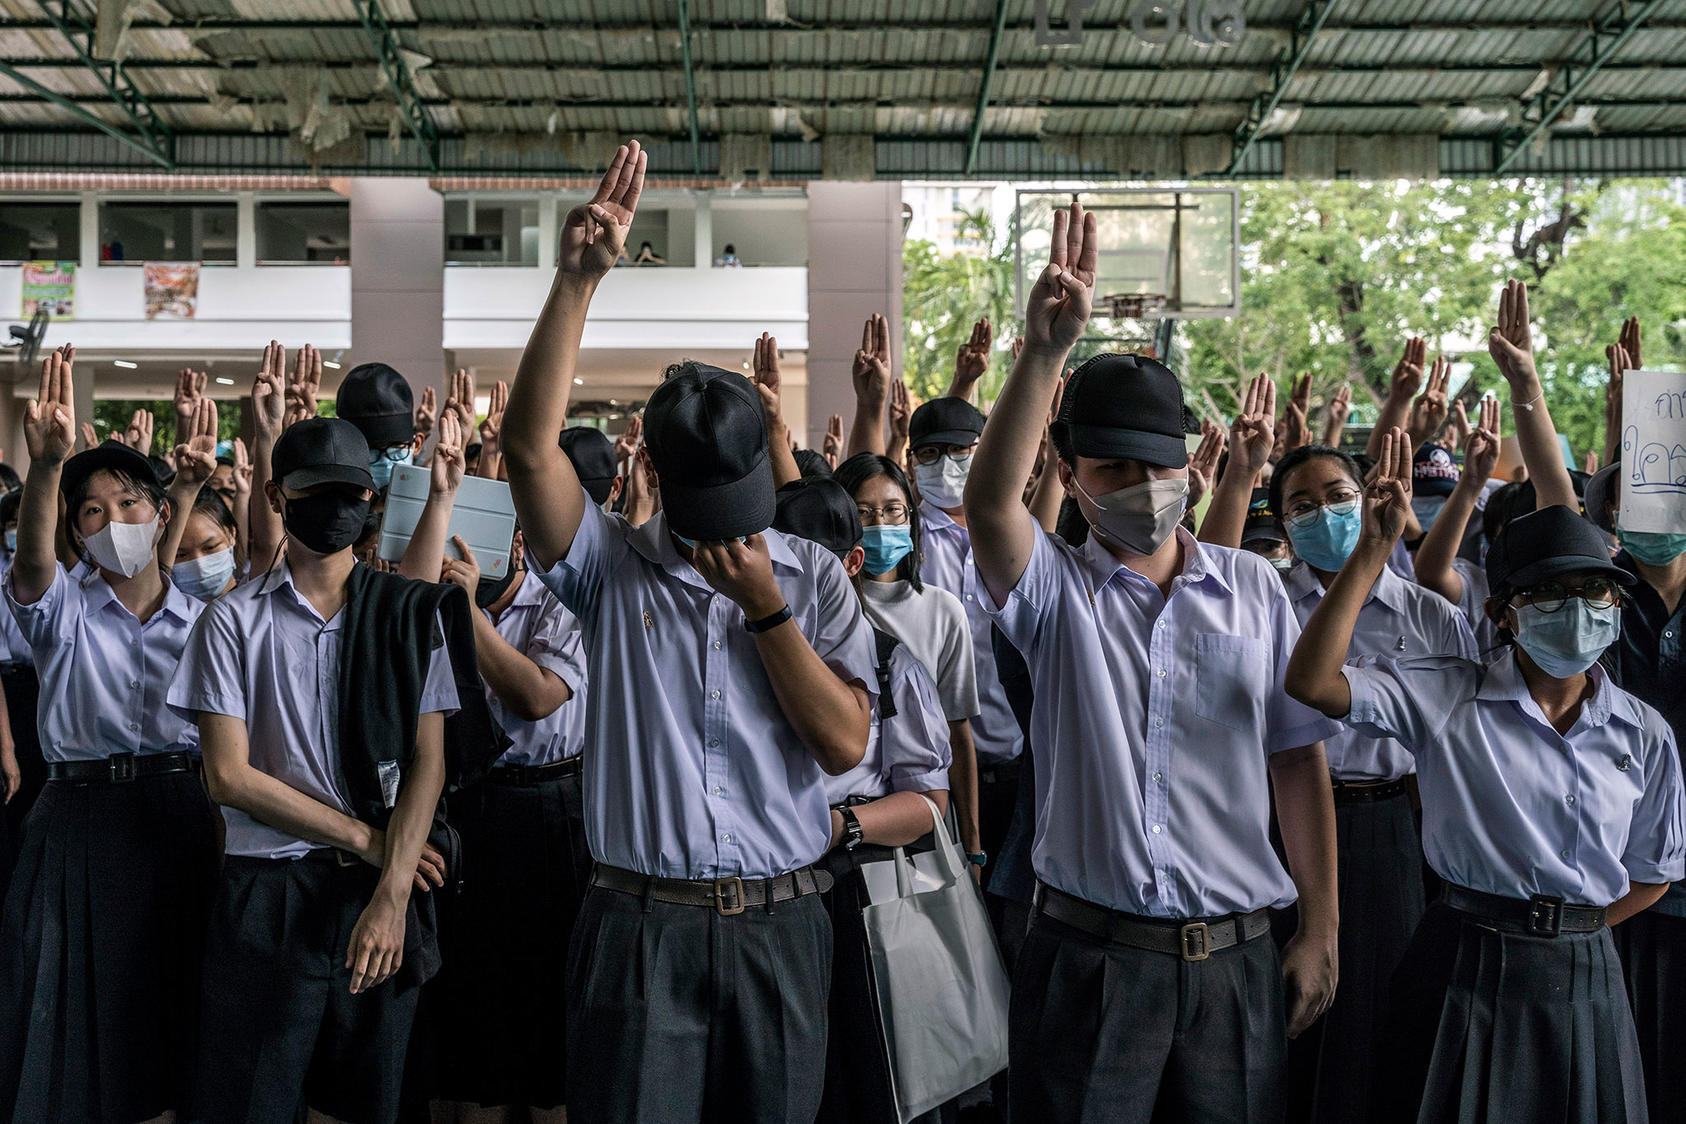 At a protest in Bangkok on July 31, 2020, students flash a three-fingered salute from the "Hunger Games" movies that has become a symbol of antigovernment defiance in Thailand. (Adam Dean/The New York Times)